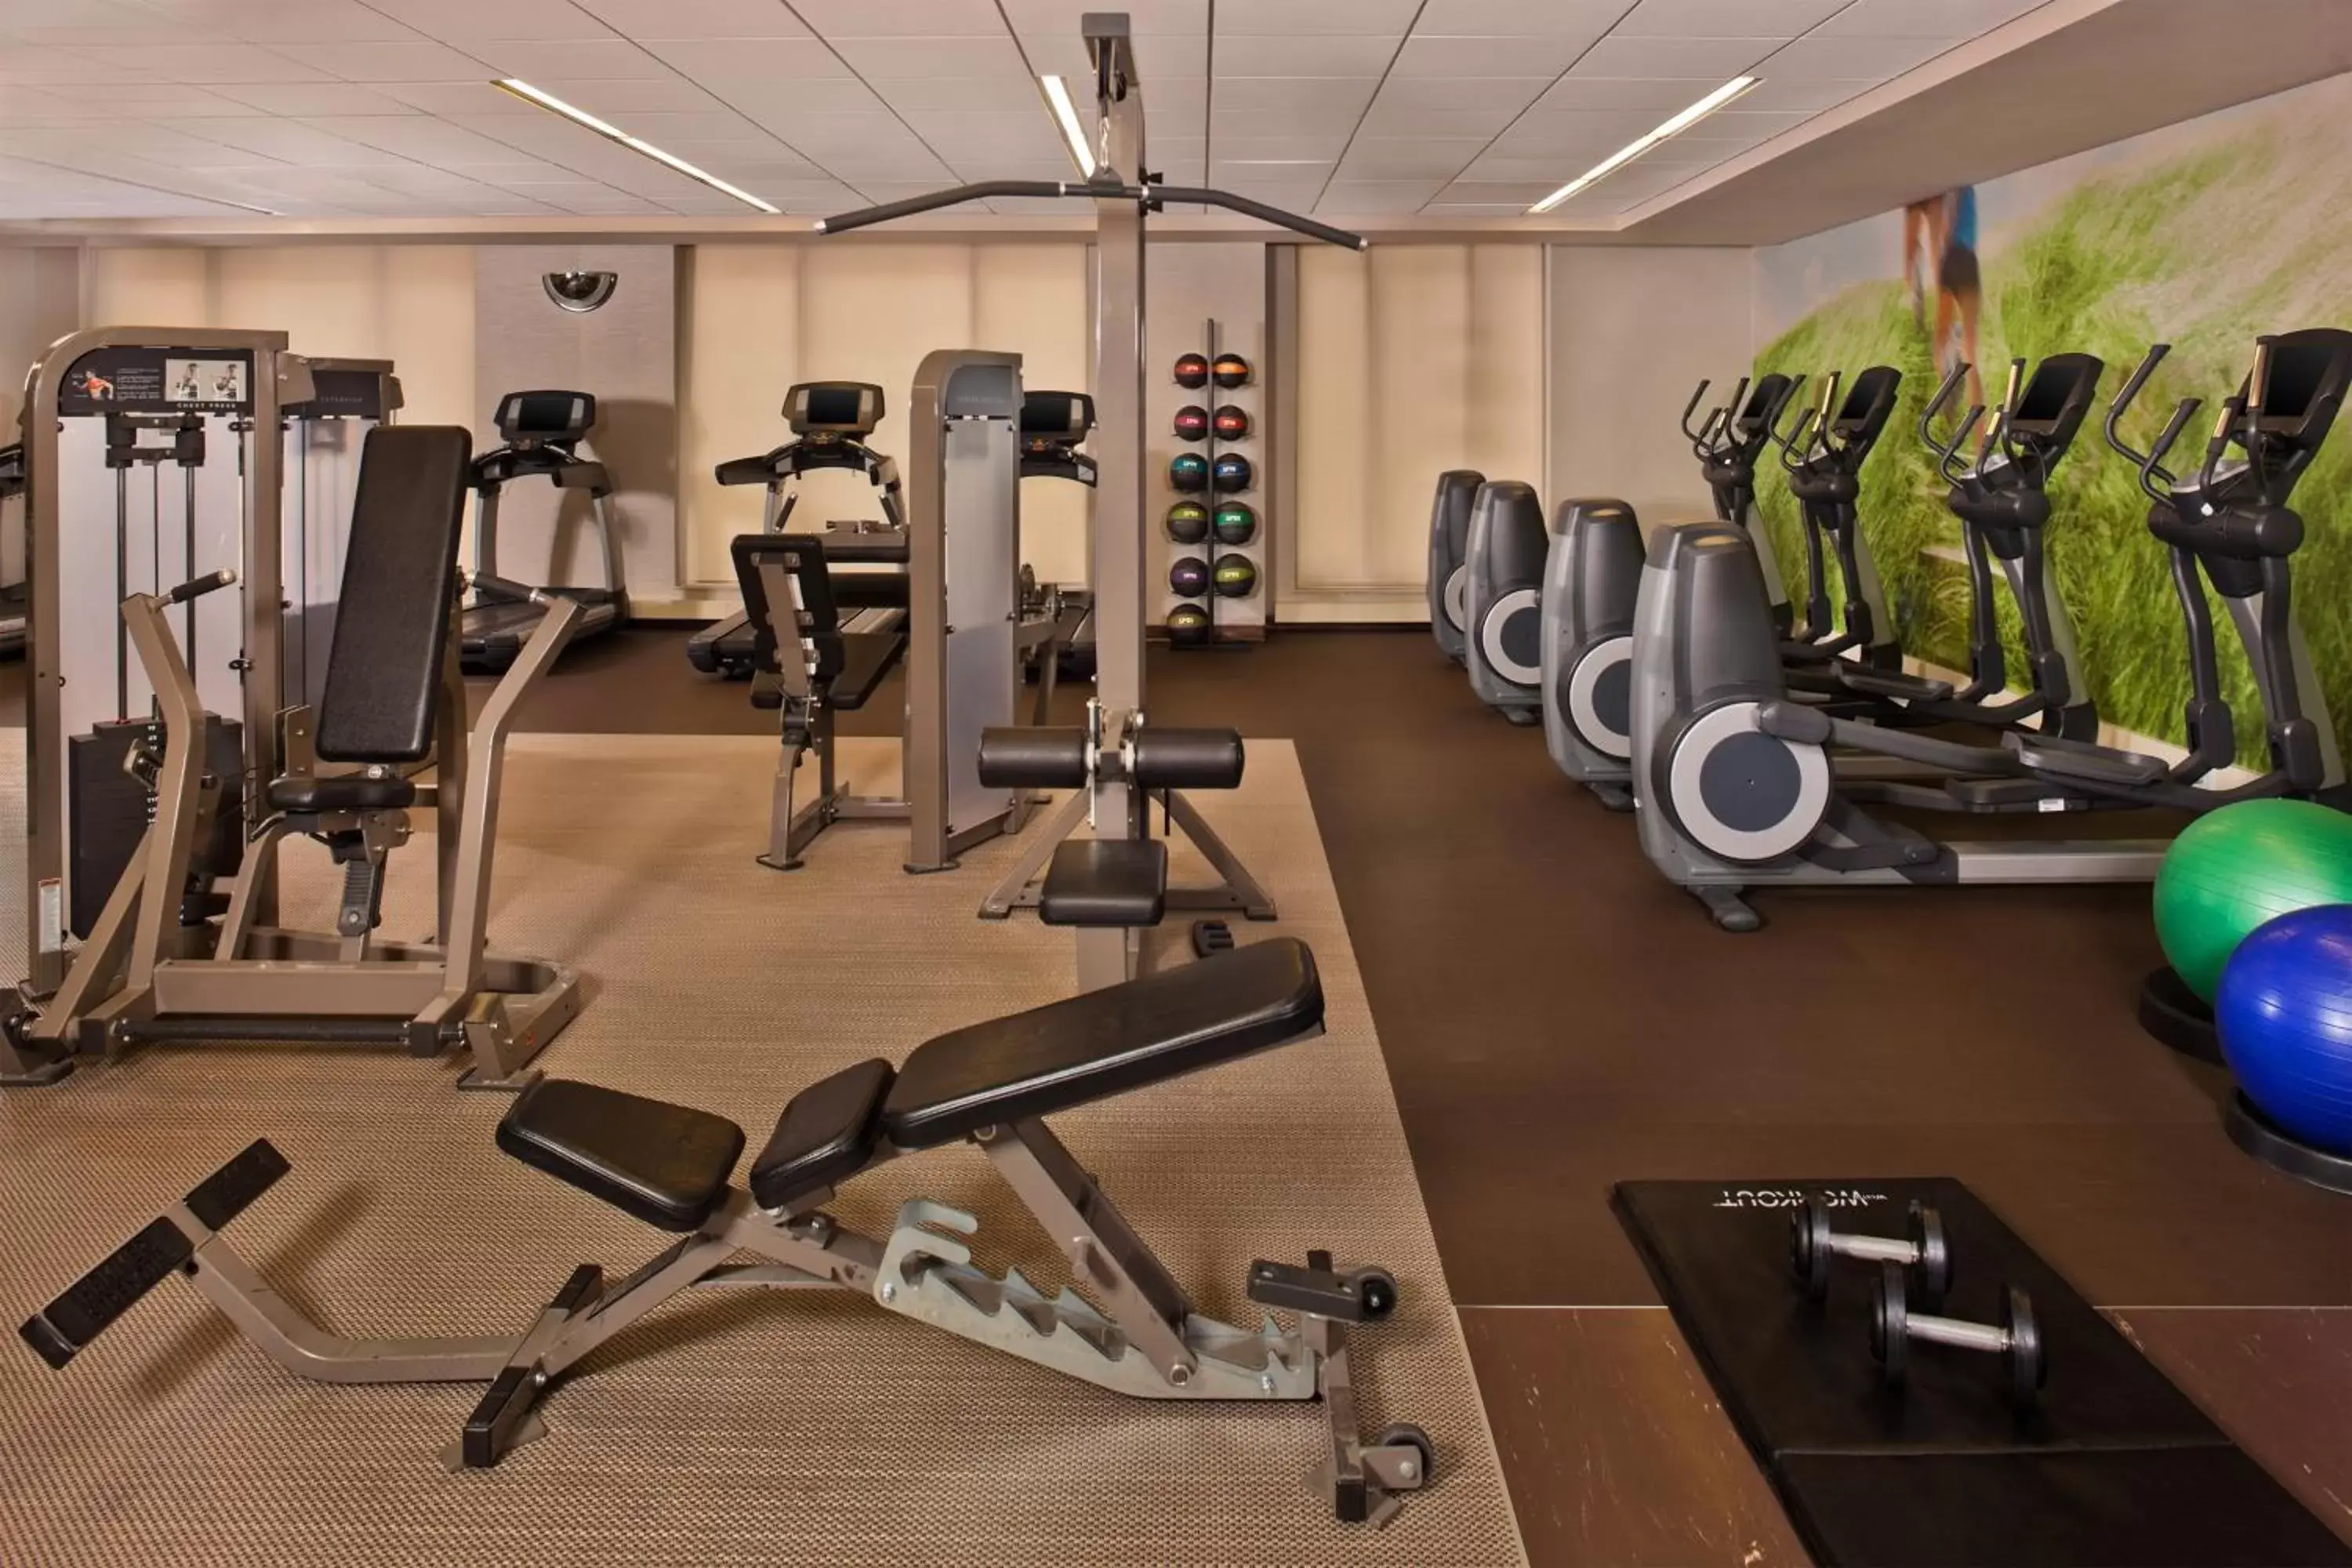 Fitness centre/facilities, Fitness Center/Facilities in The Westin Book Cadillac Detroit